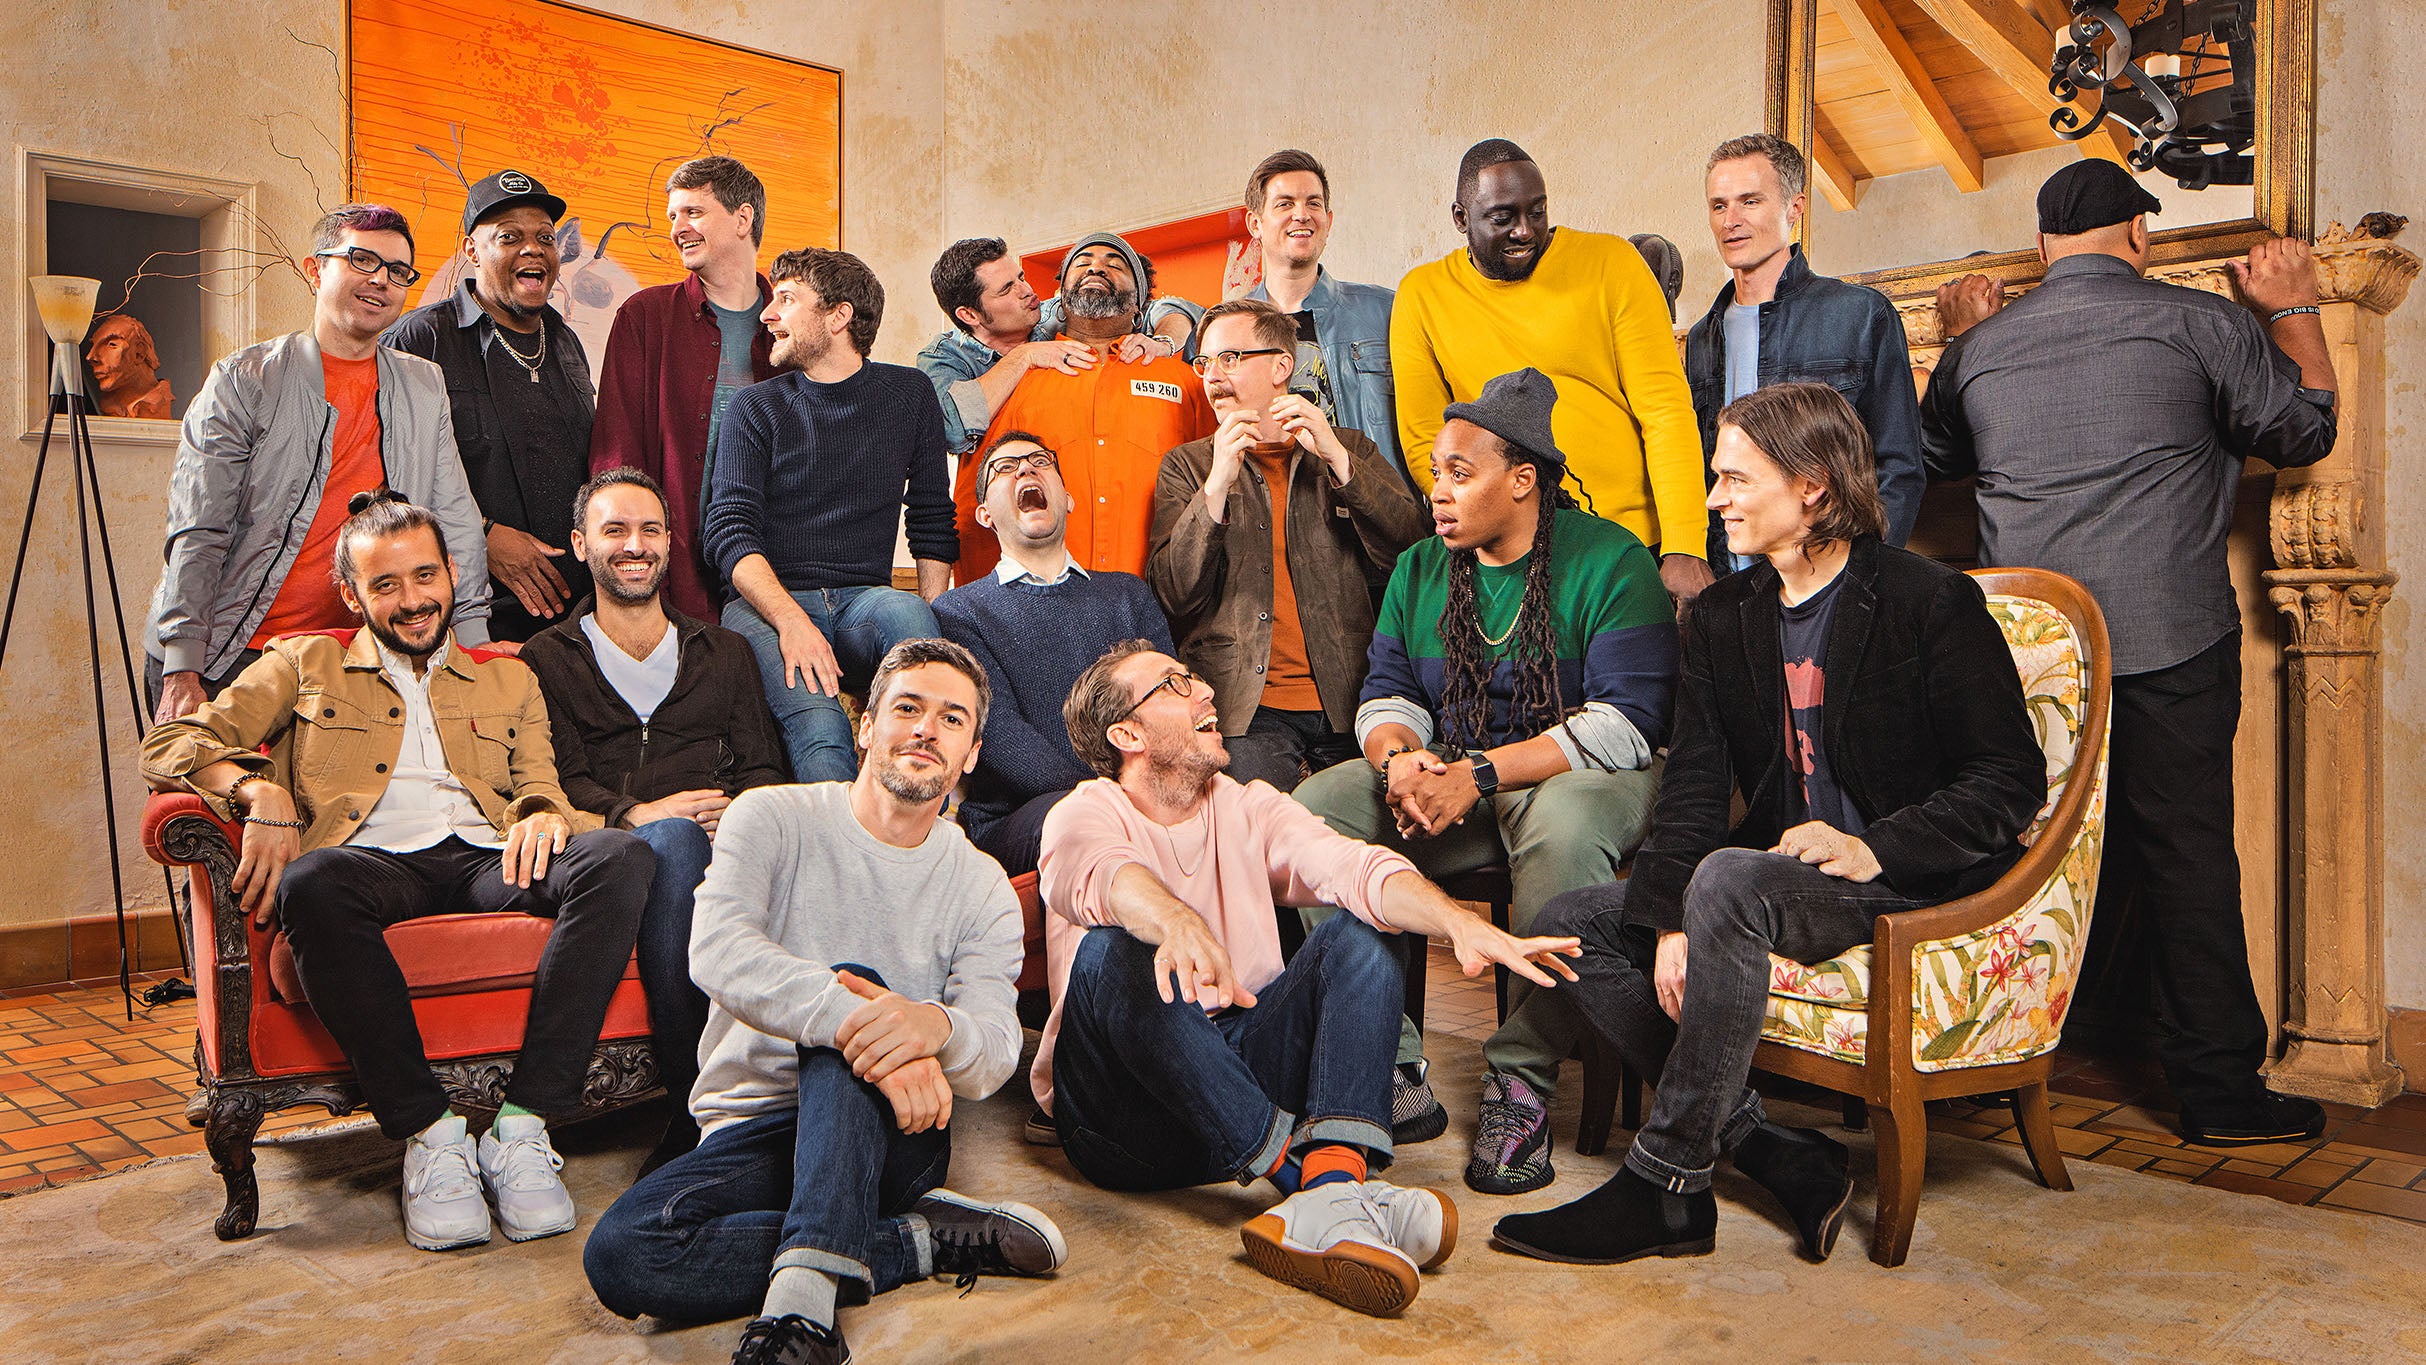 Snarky Puppy free presale pasword for early tickets in Oakland